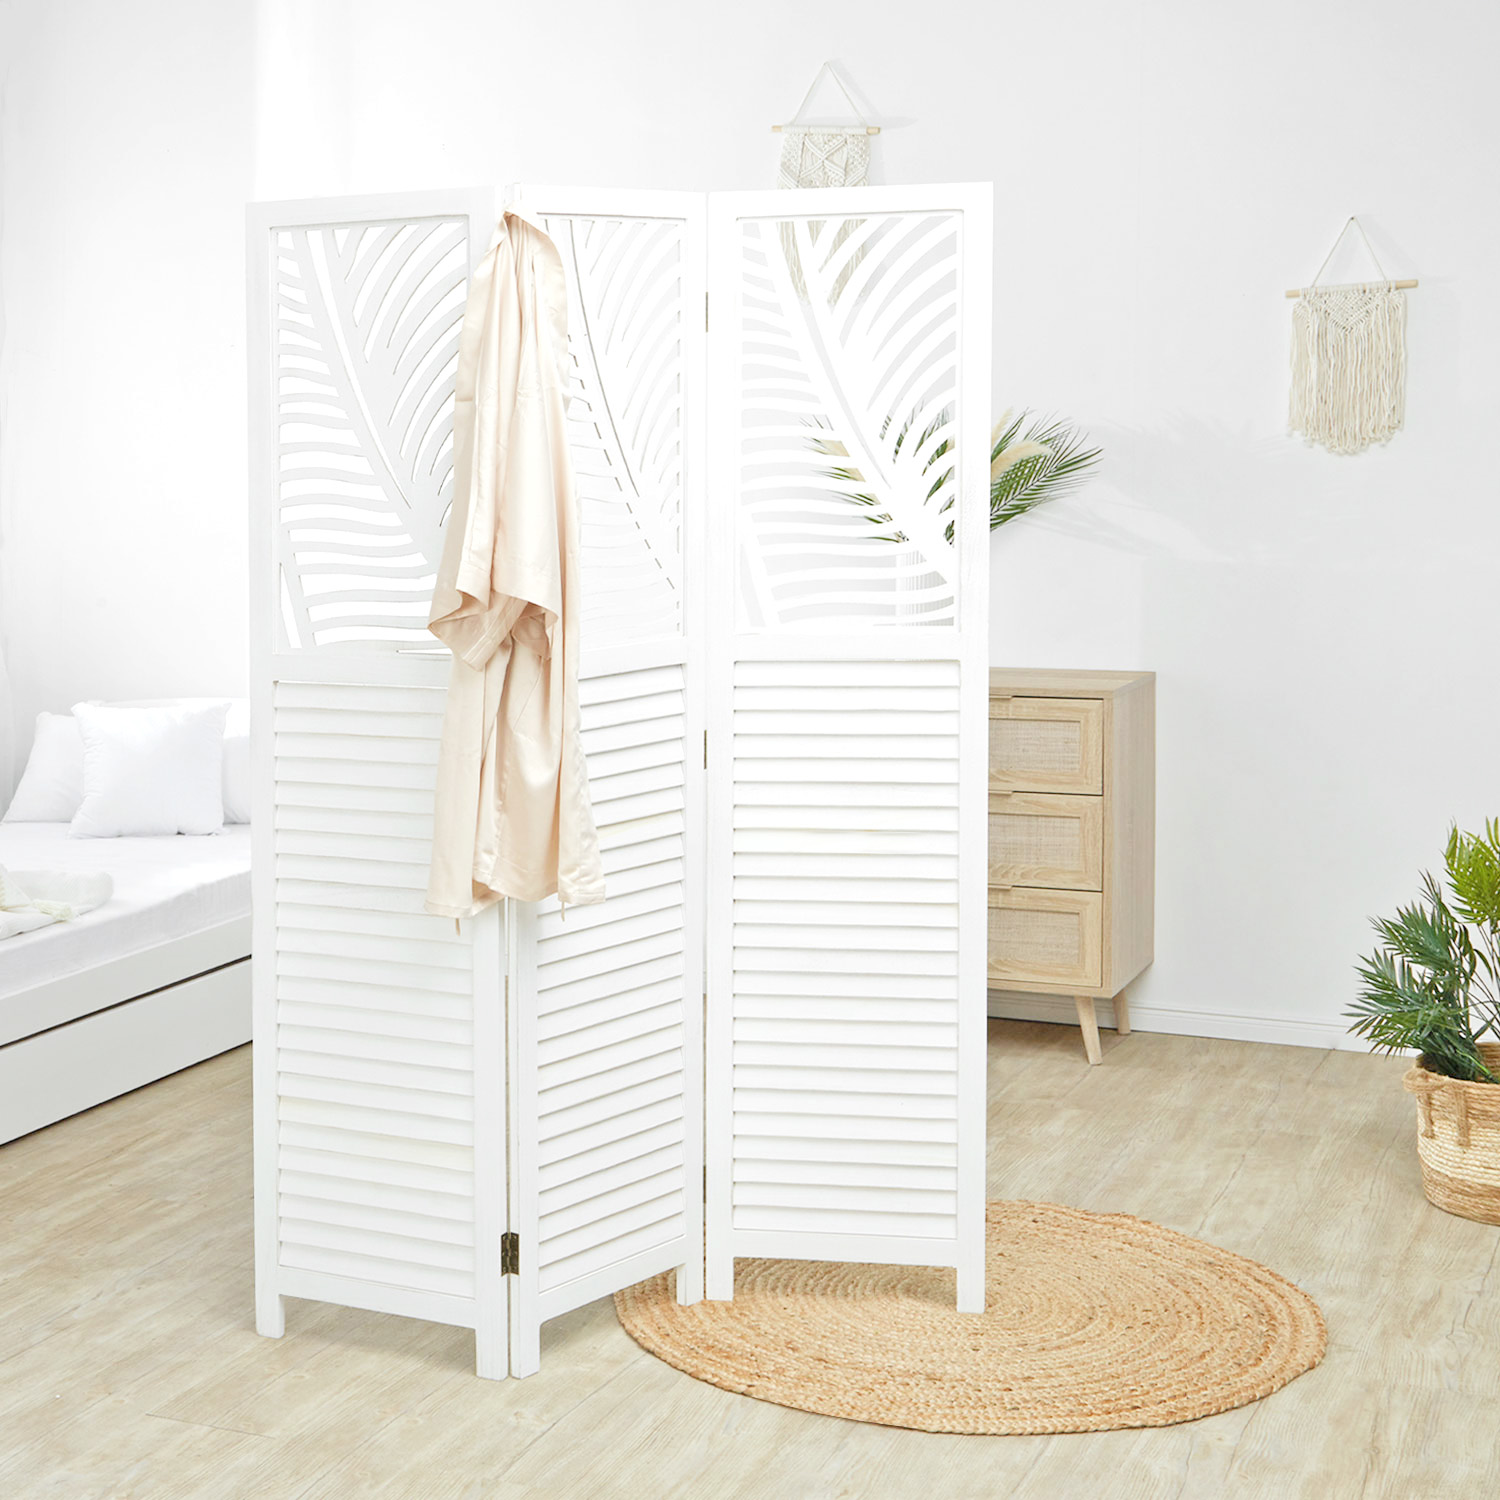 3 fold Wooden Paravent Room Divider Privacy Screen Partition Folding Vintage Look White